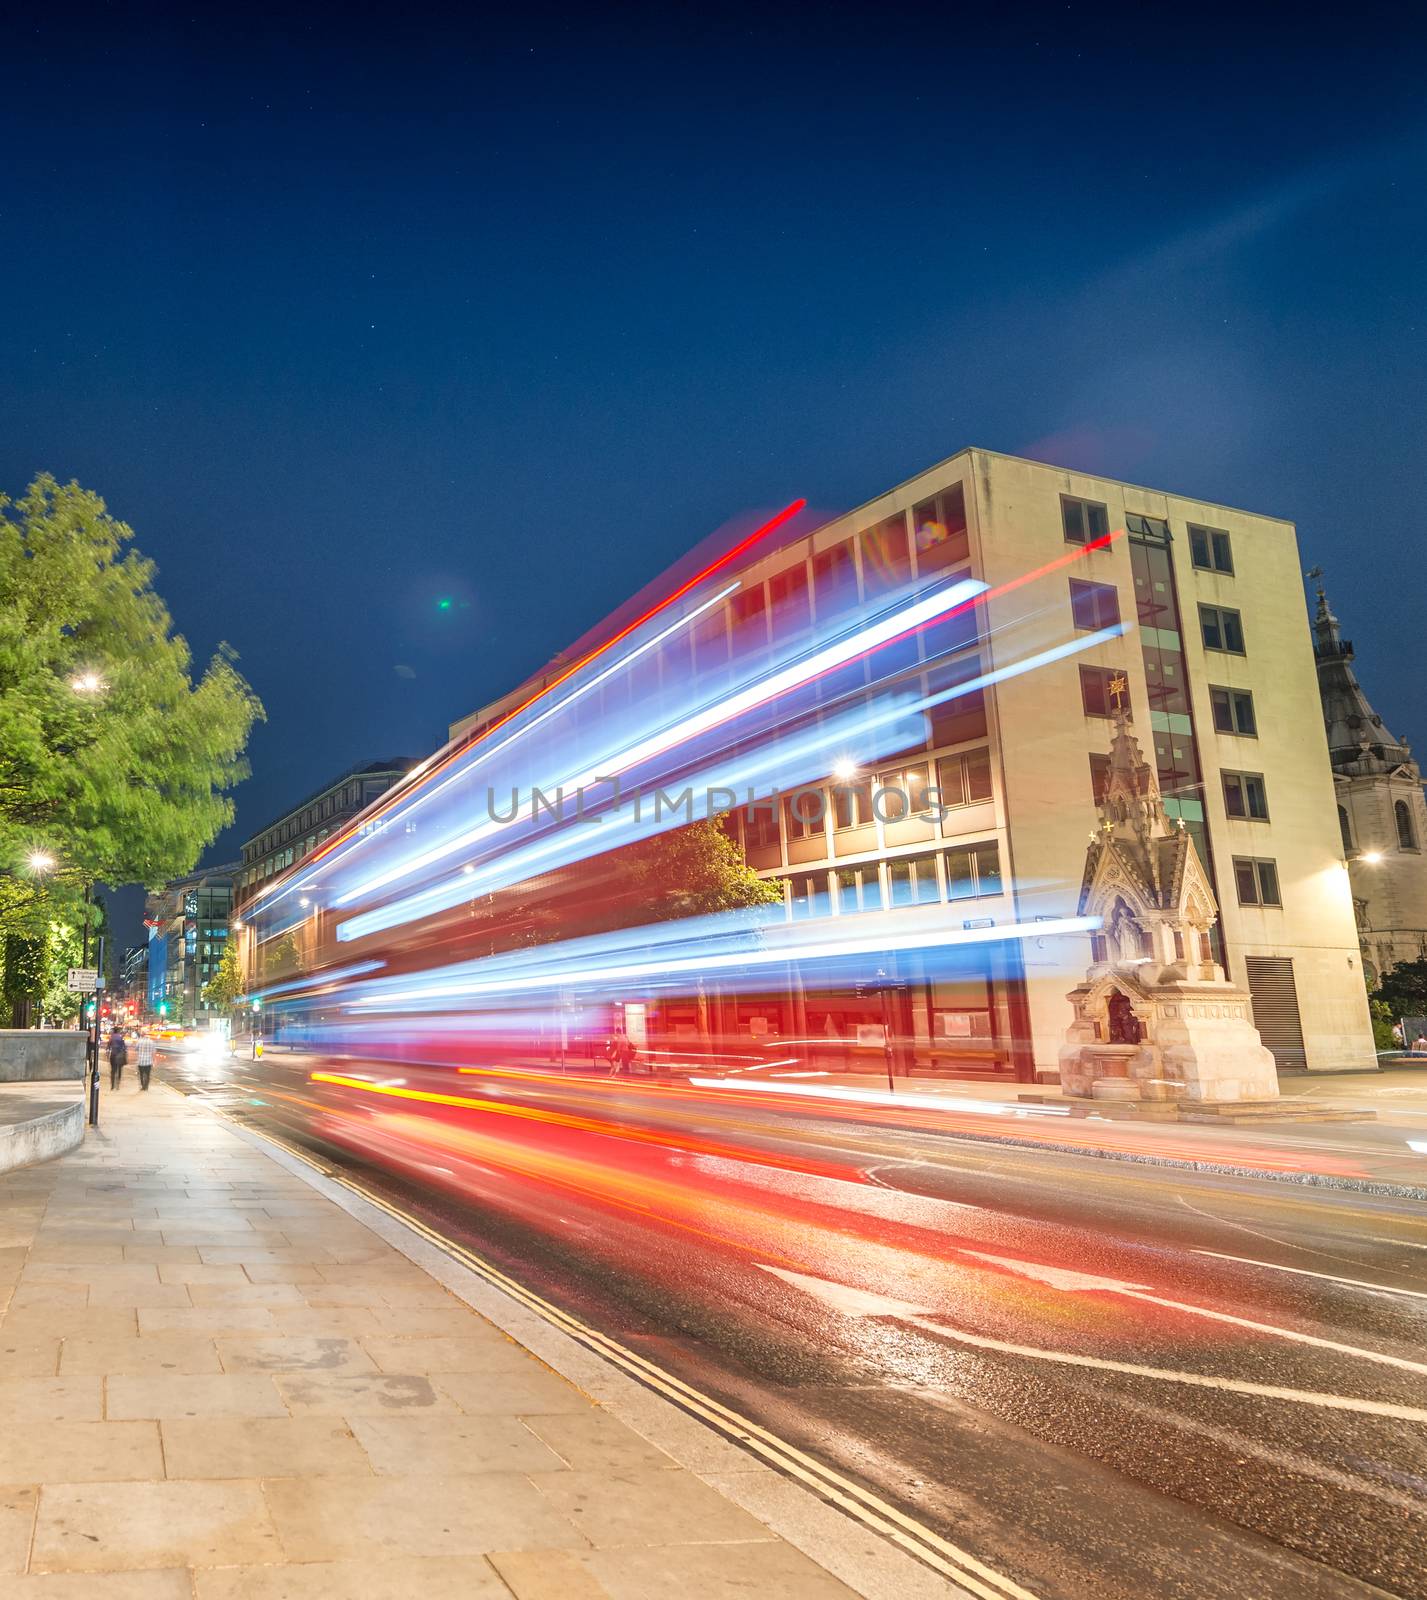 Double Decker bus light trails in London streets by jovannig